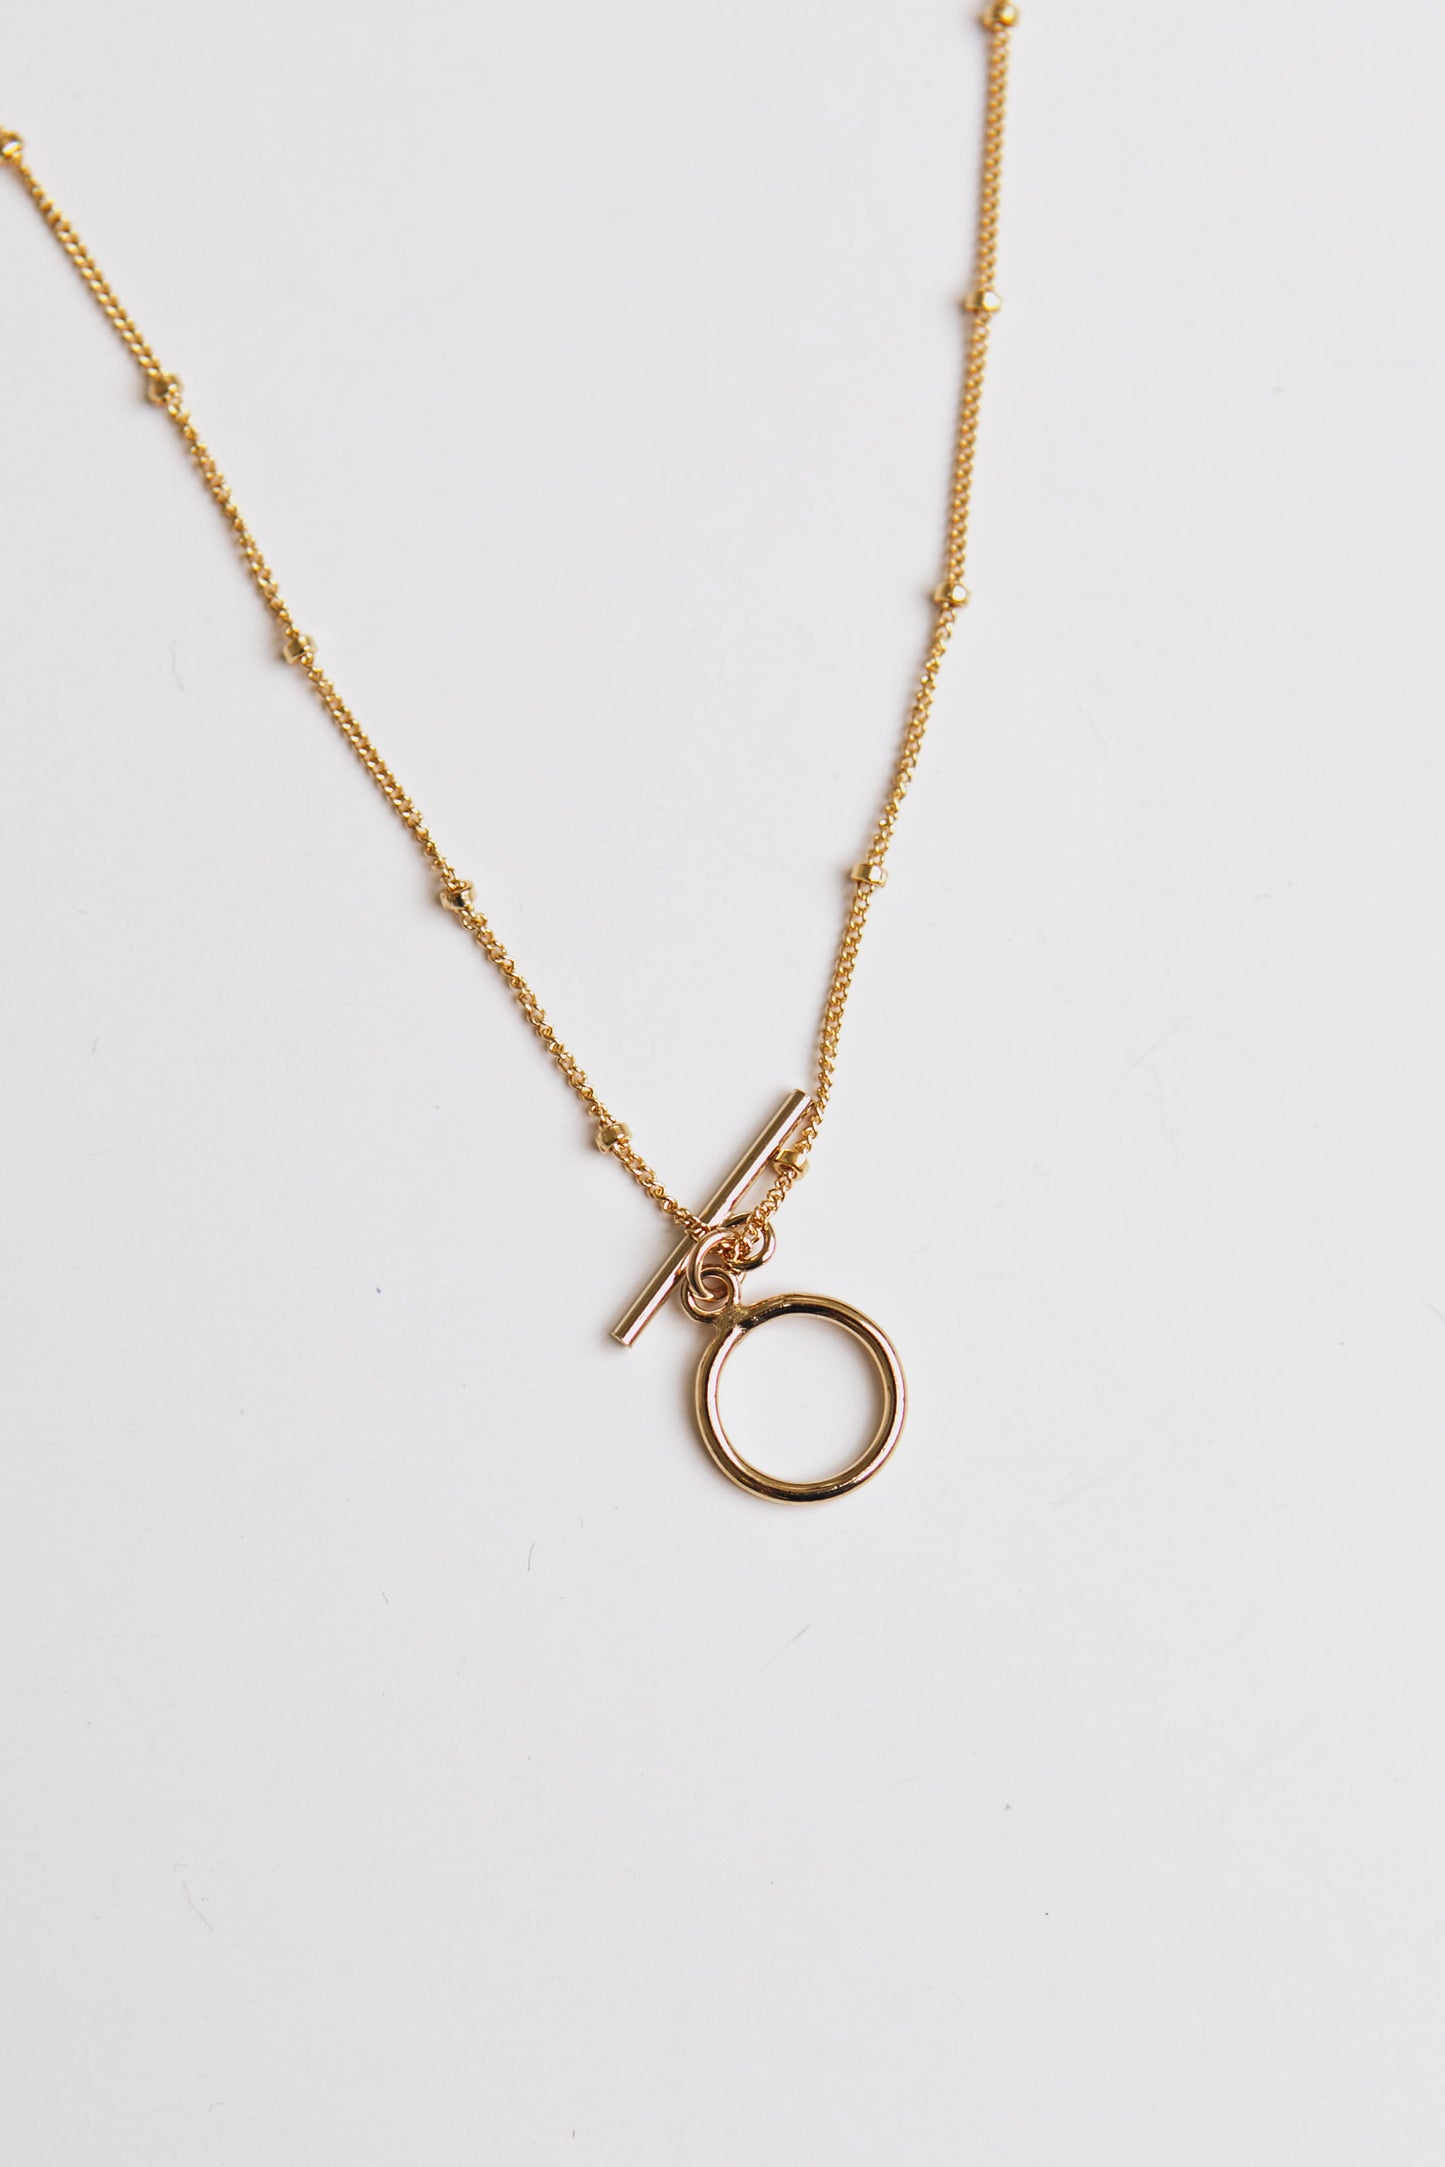 Bailey - Ball Chain and Circle Pendant Necklace